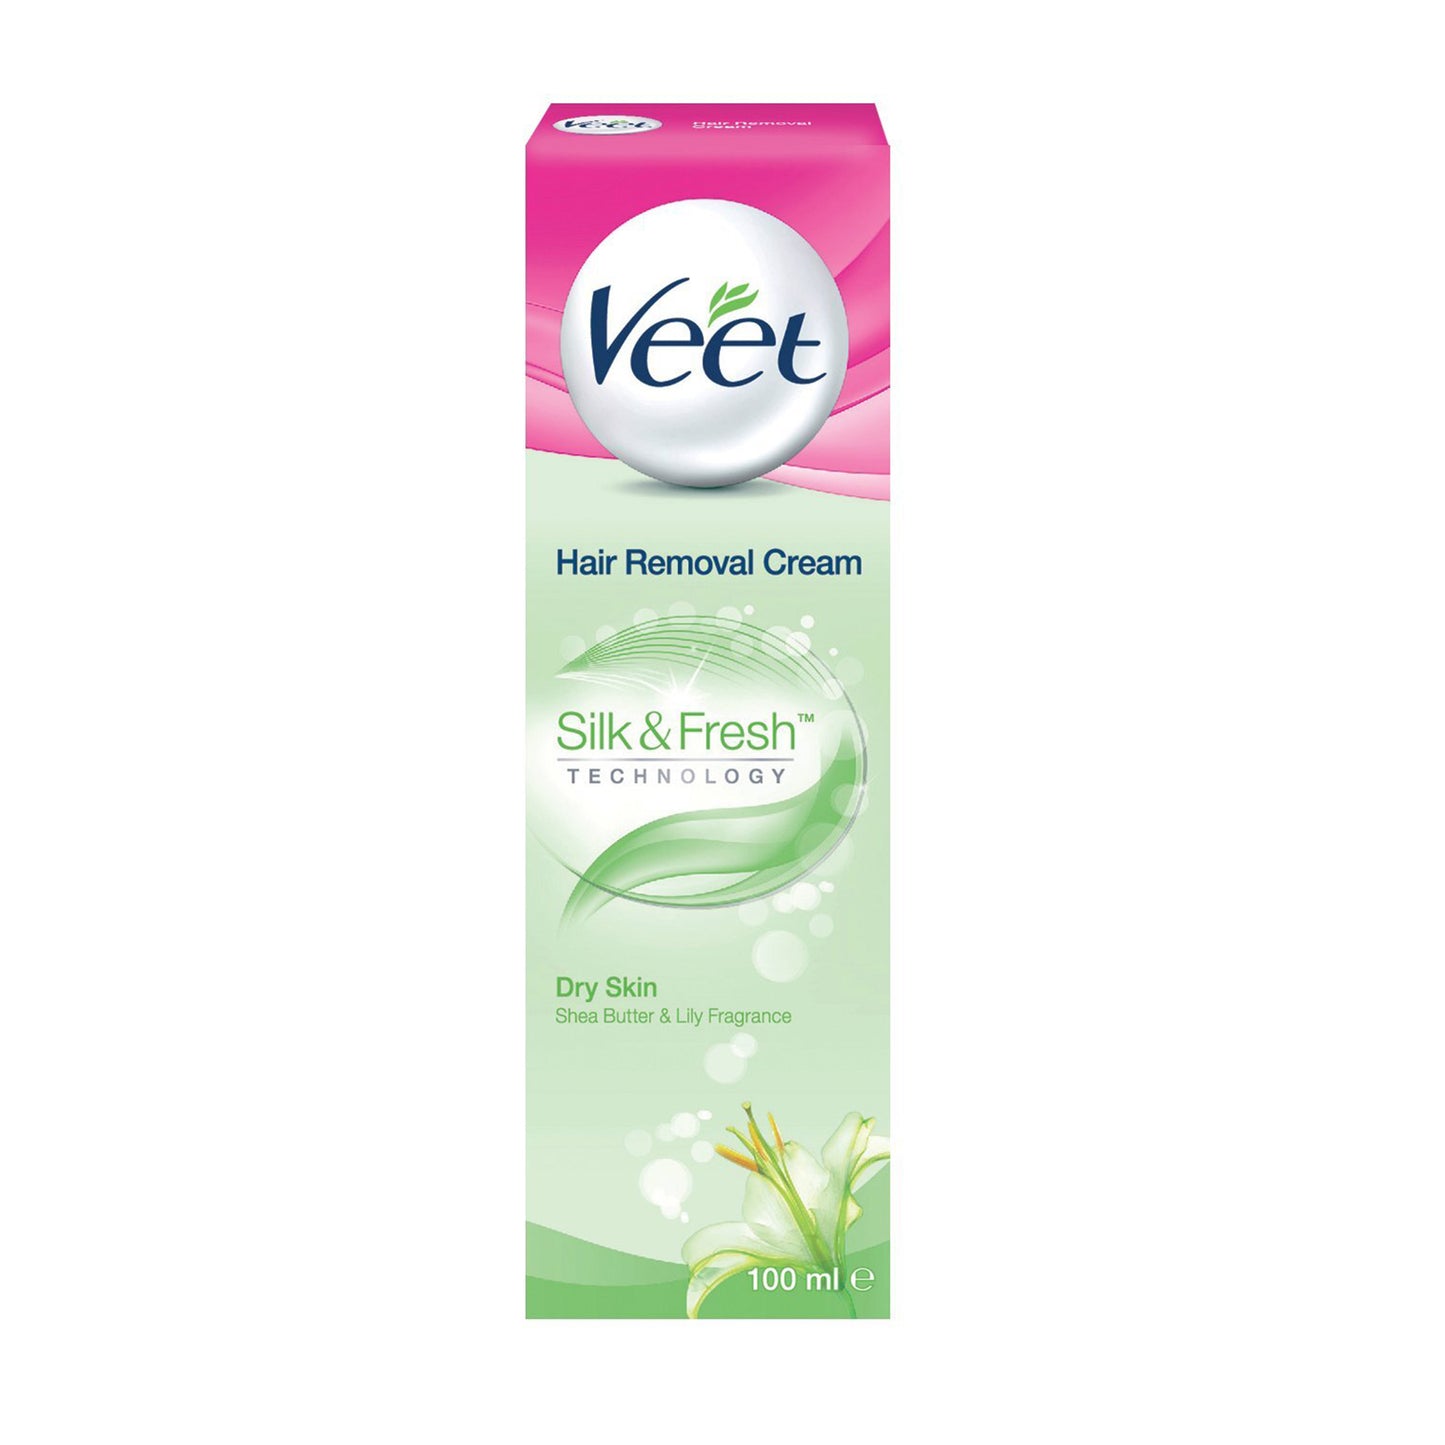 VEET - HAIR REMOVAL CREAM FOR DRY SKIN WITH SHEA BUTTER & LILY FRAGRANCE - 100G